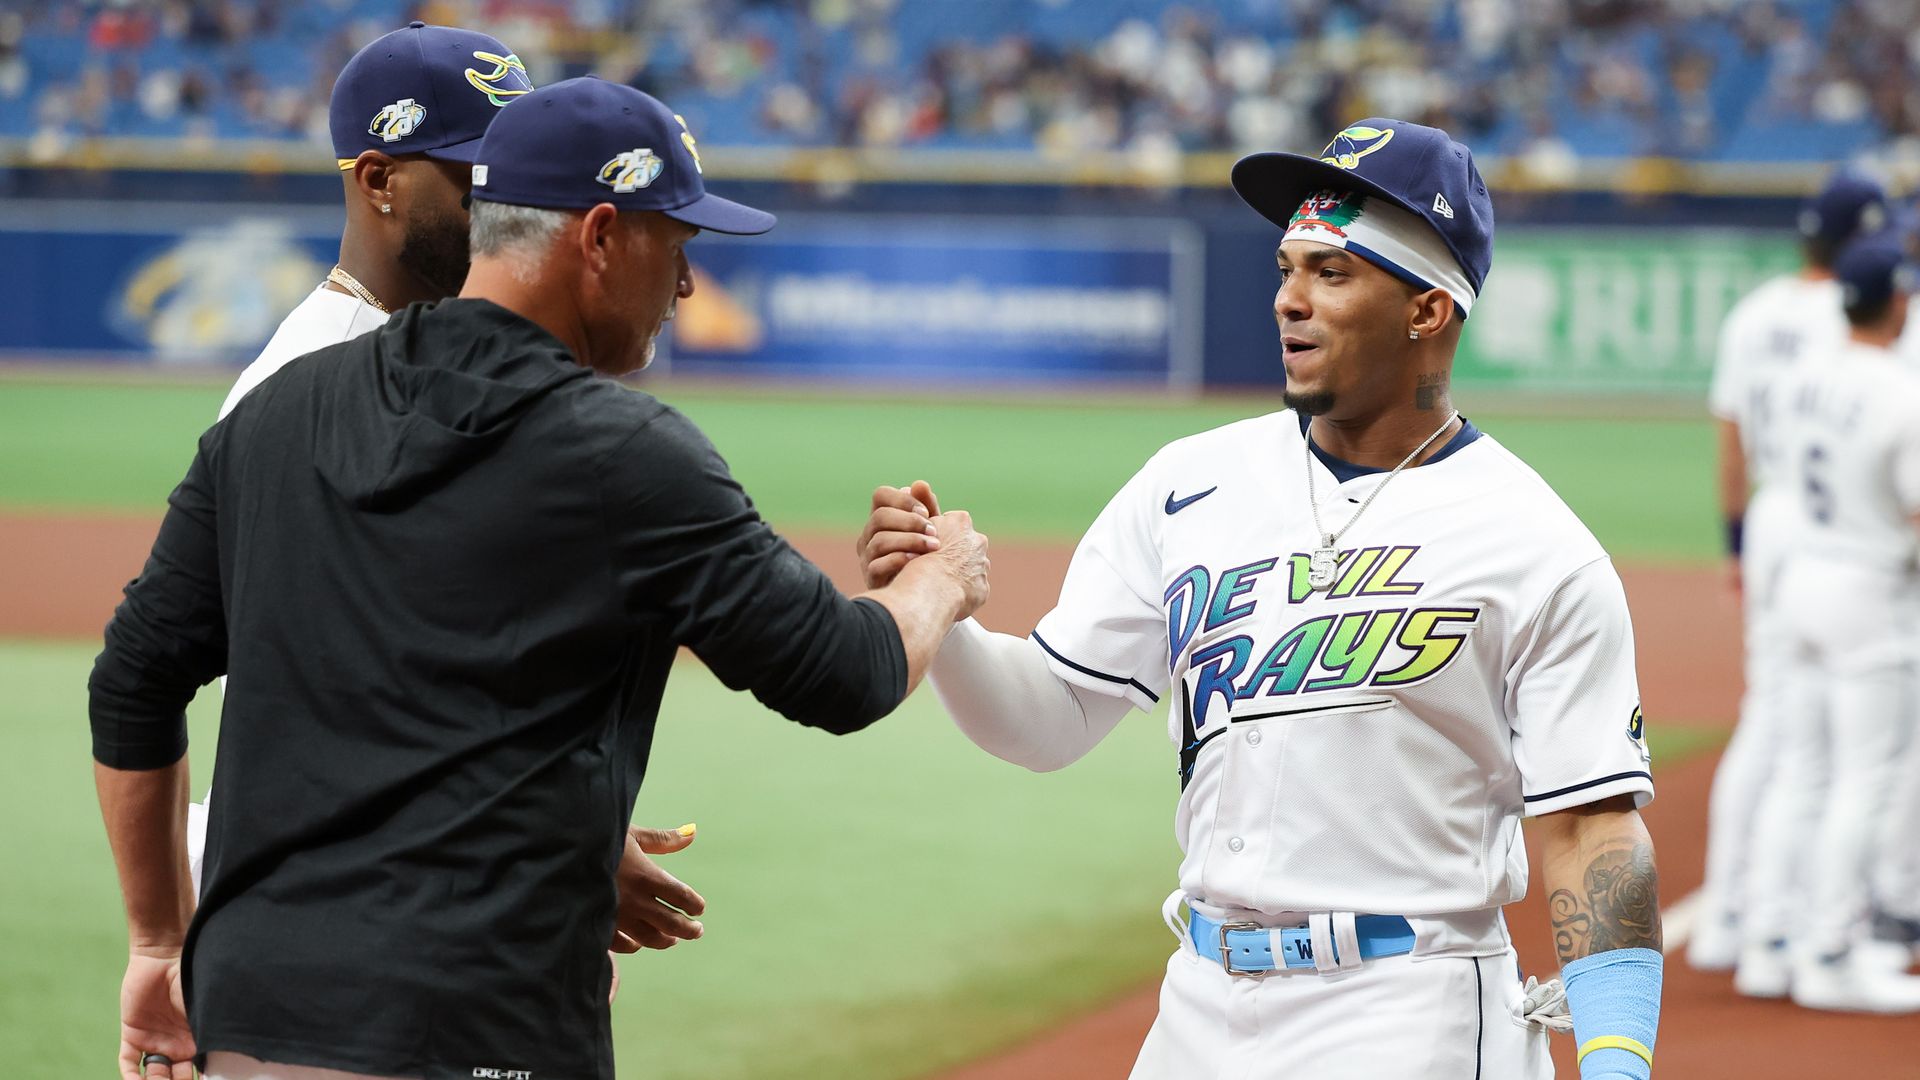 Wander Franco of the Tampa Bay Rays greets Manager Kevin Cash wearing a throwback Devil Rays jersey.